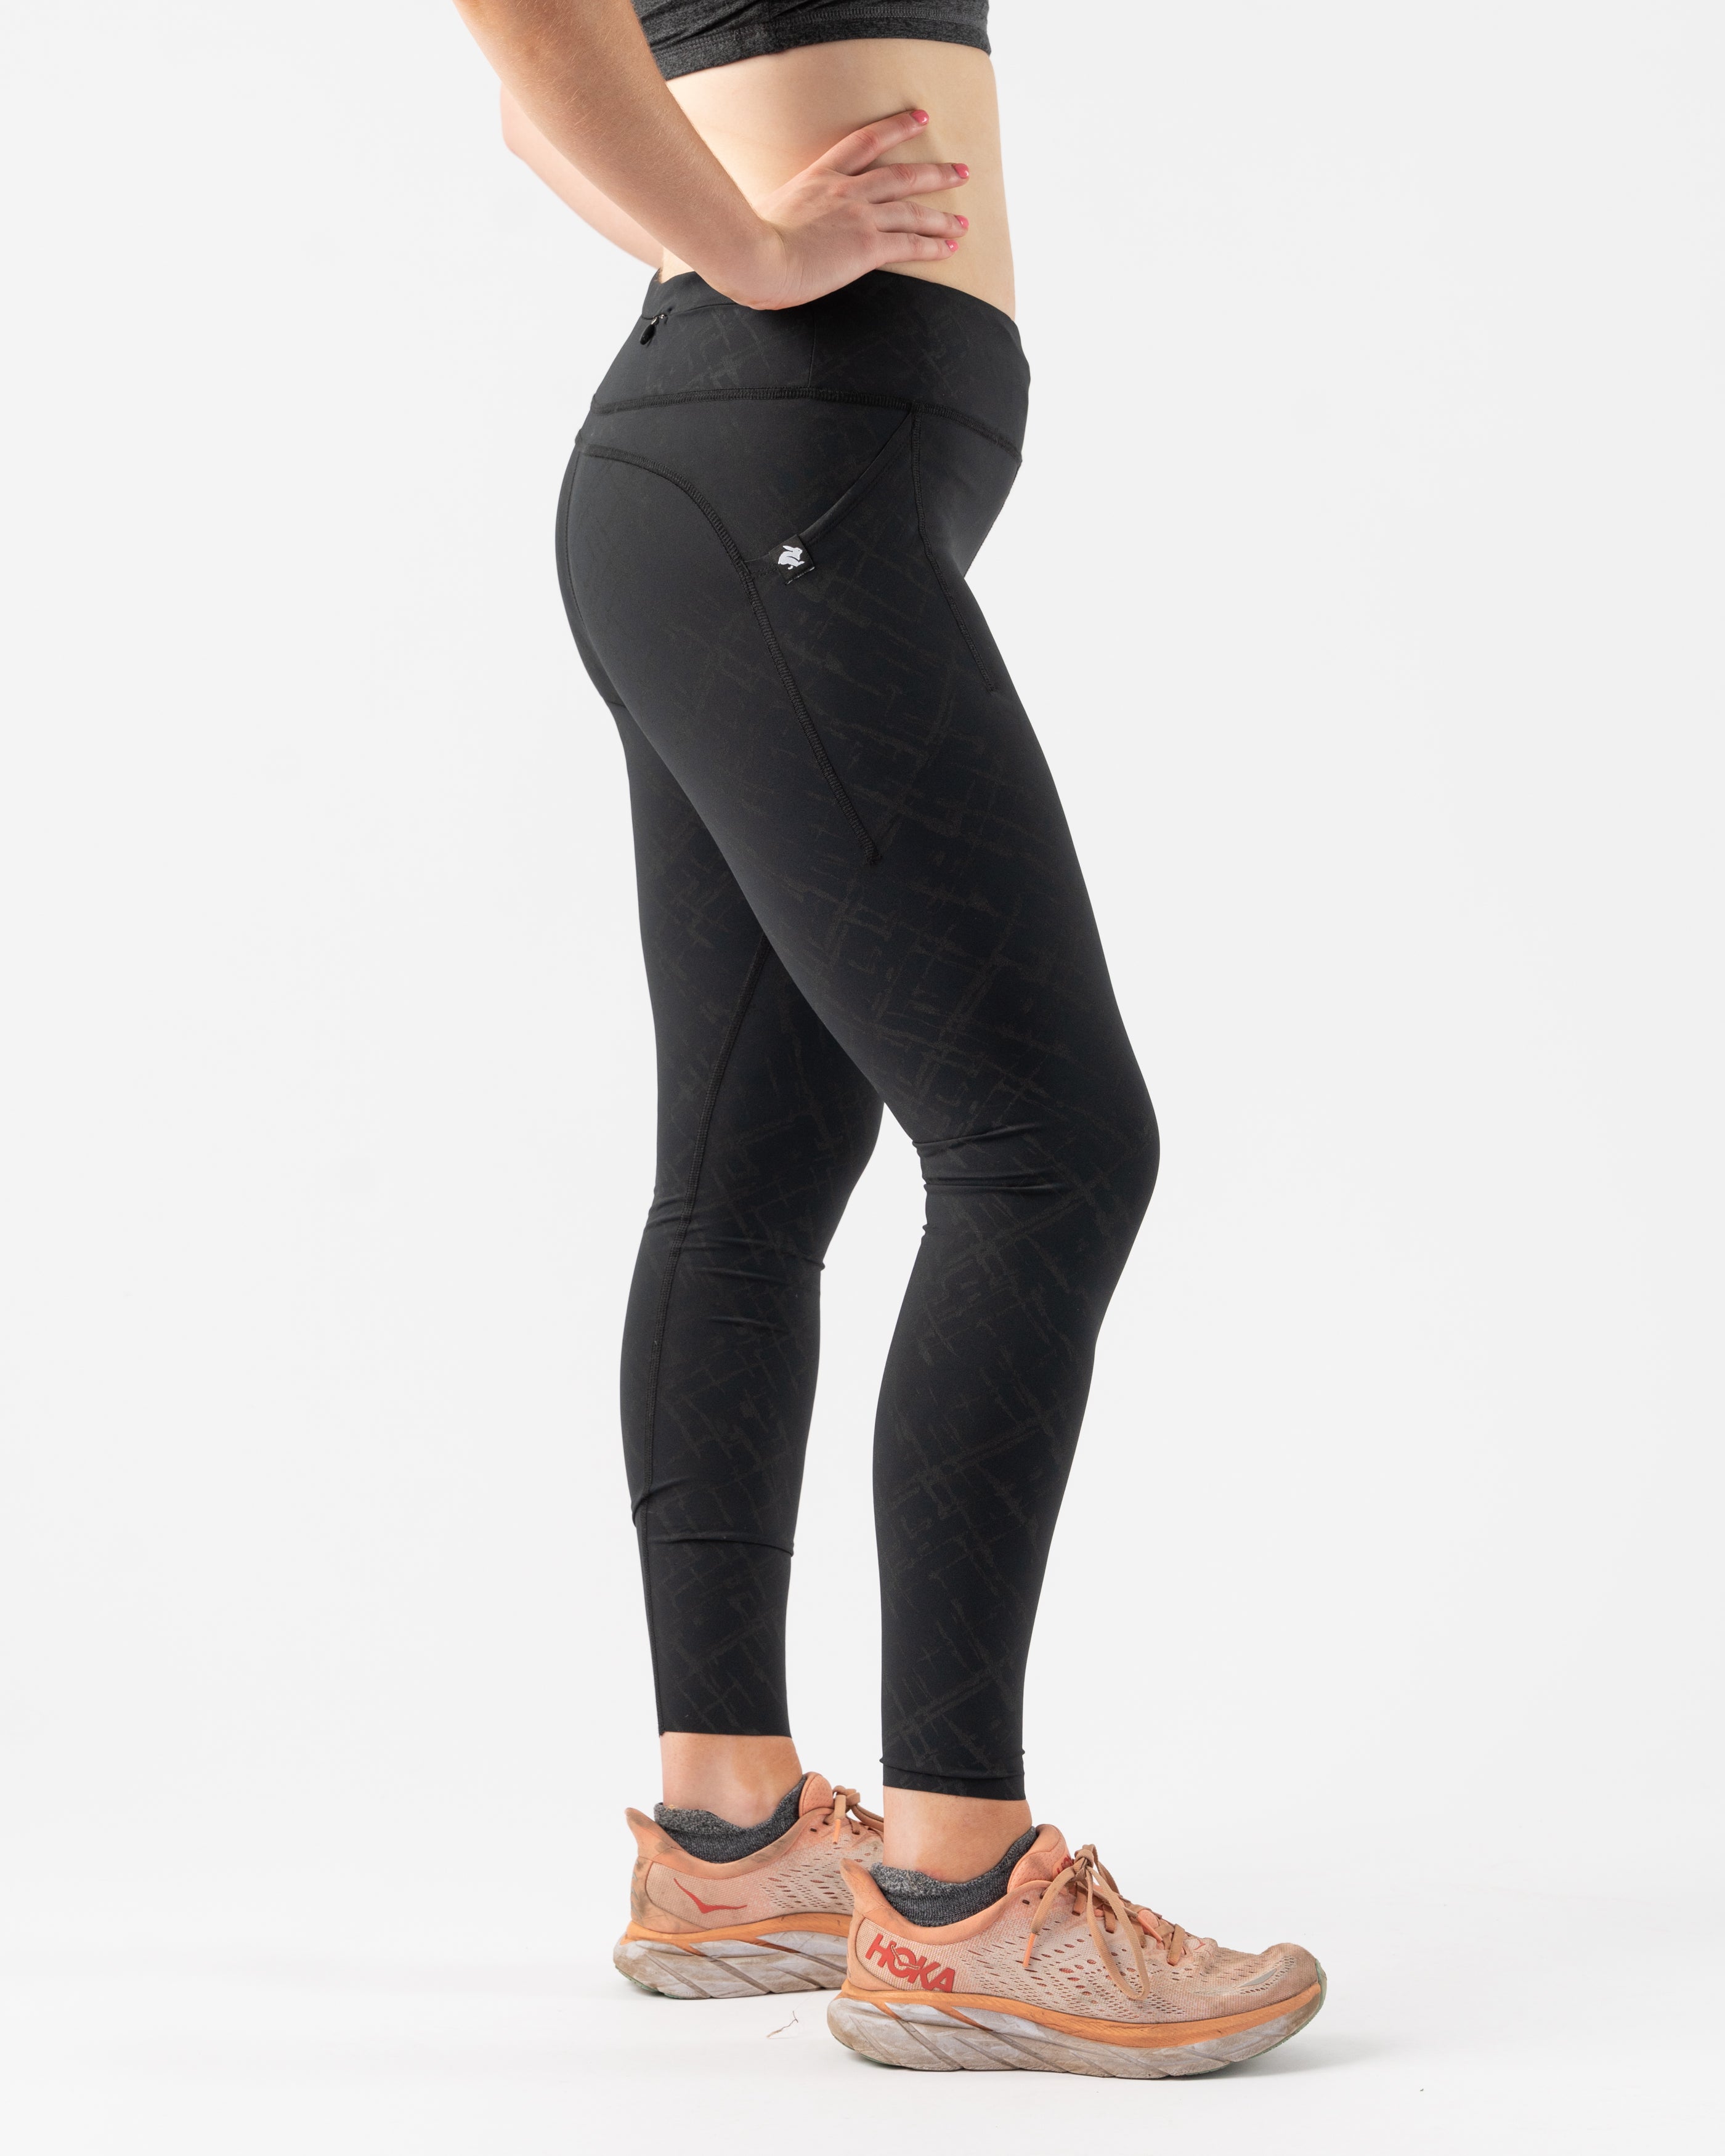 Asics Core Winter Tight - Leggings Women's, Product Review